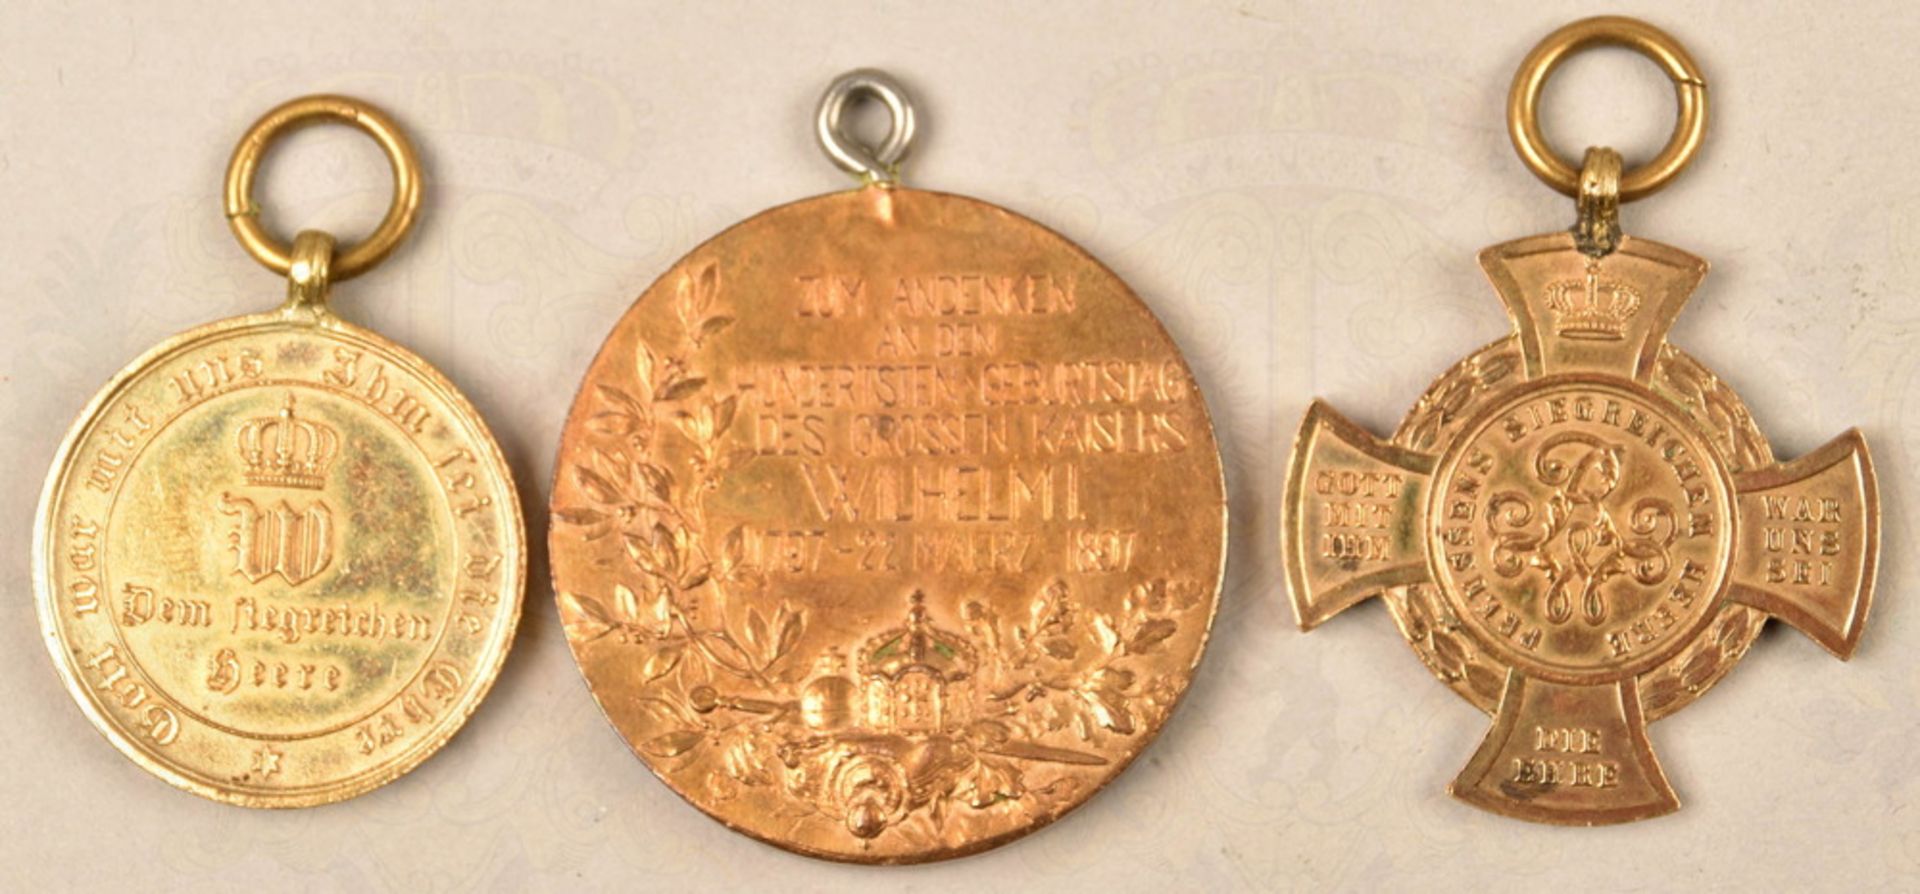 3 Prussian awards 1866-1897 - Image 2 of 2